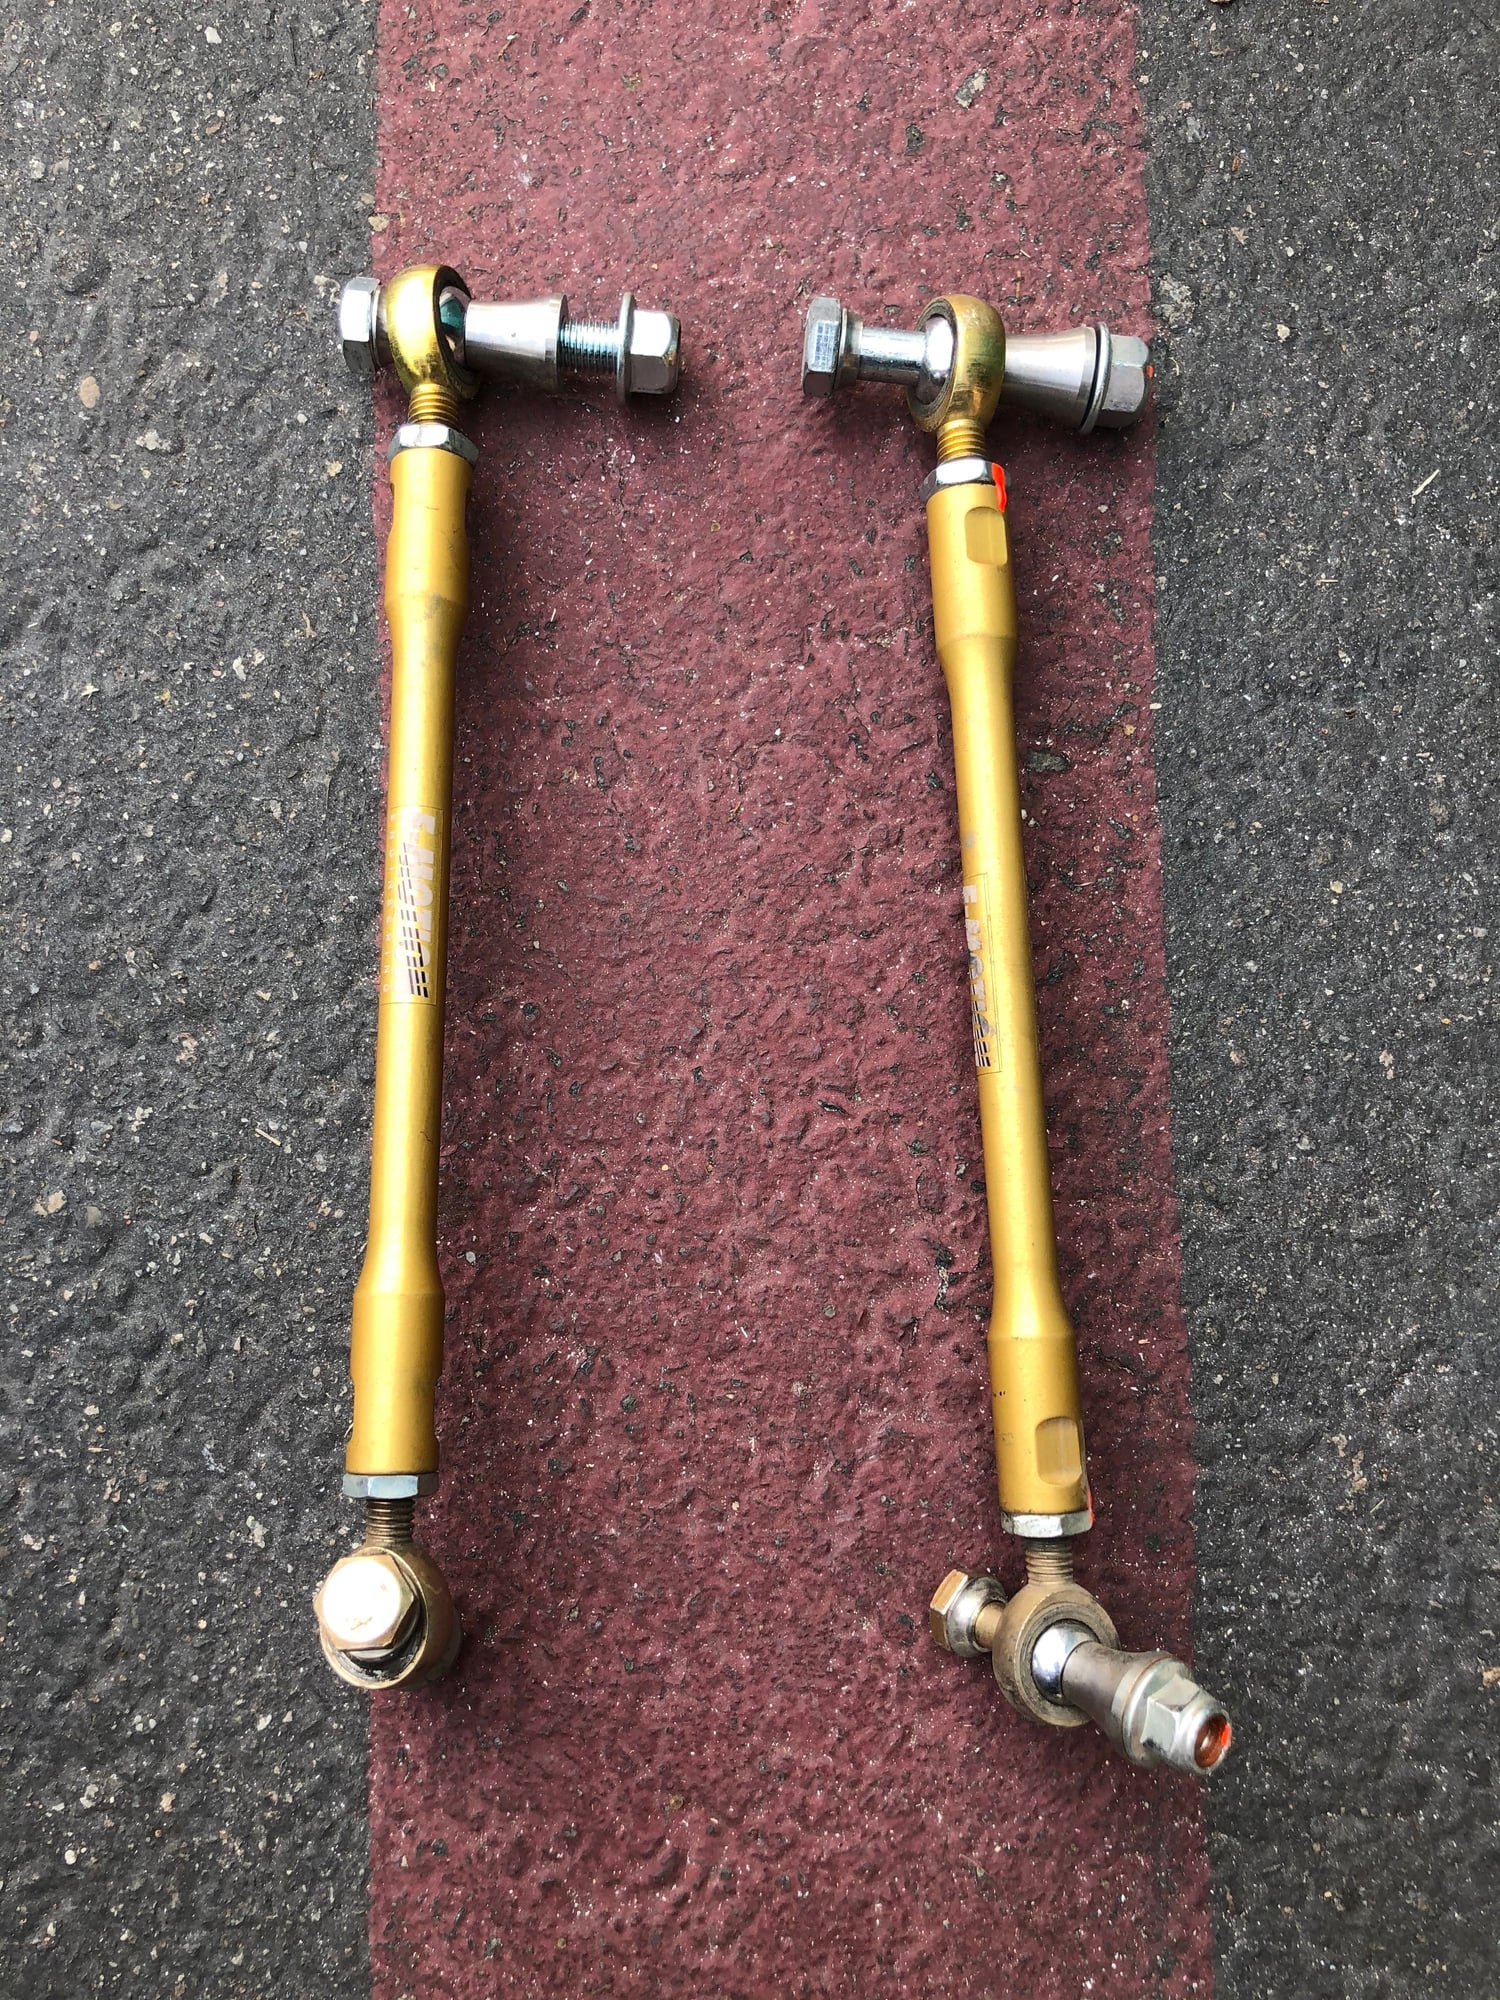 2018 Porsche GT3 - 991 GT3 front and rear sway bars - Steering/Suspension - $300 - Irvine, CA 92620, United States